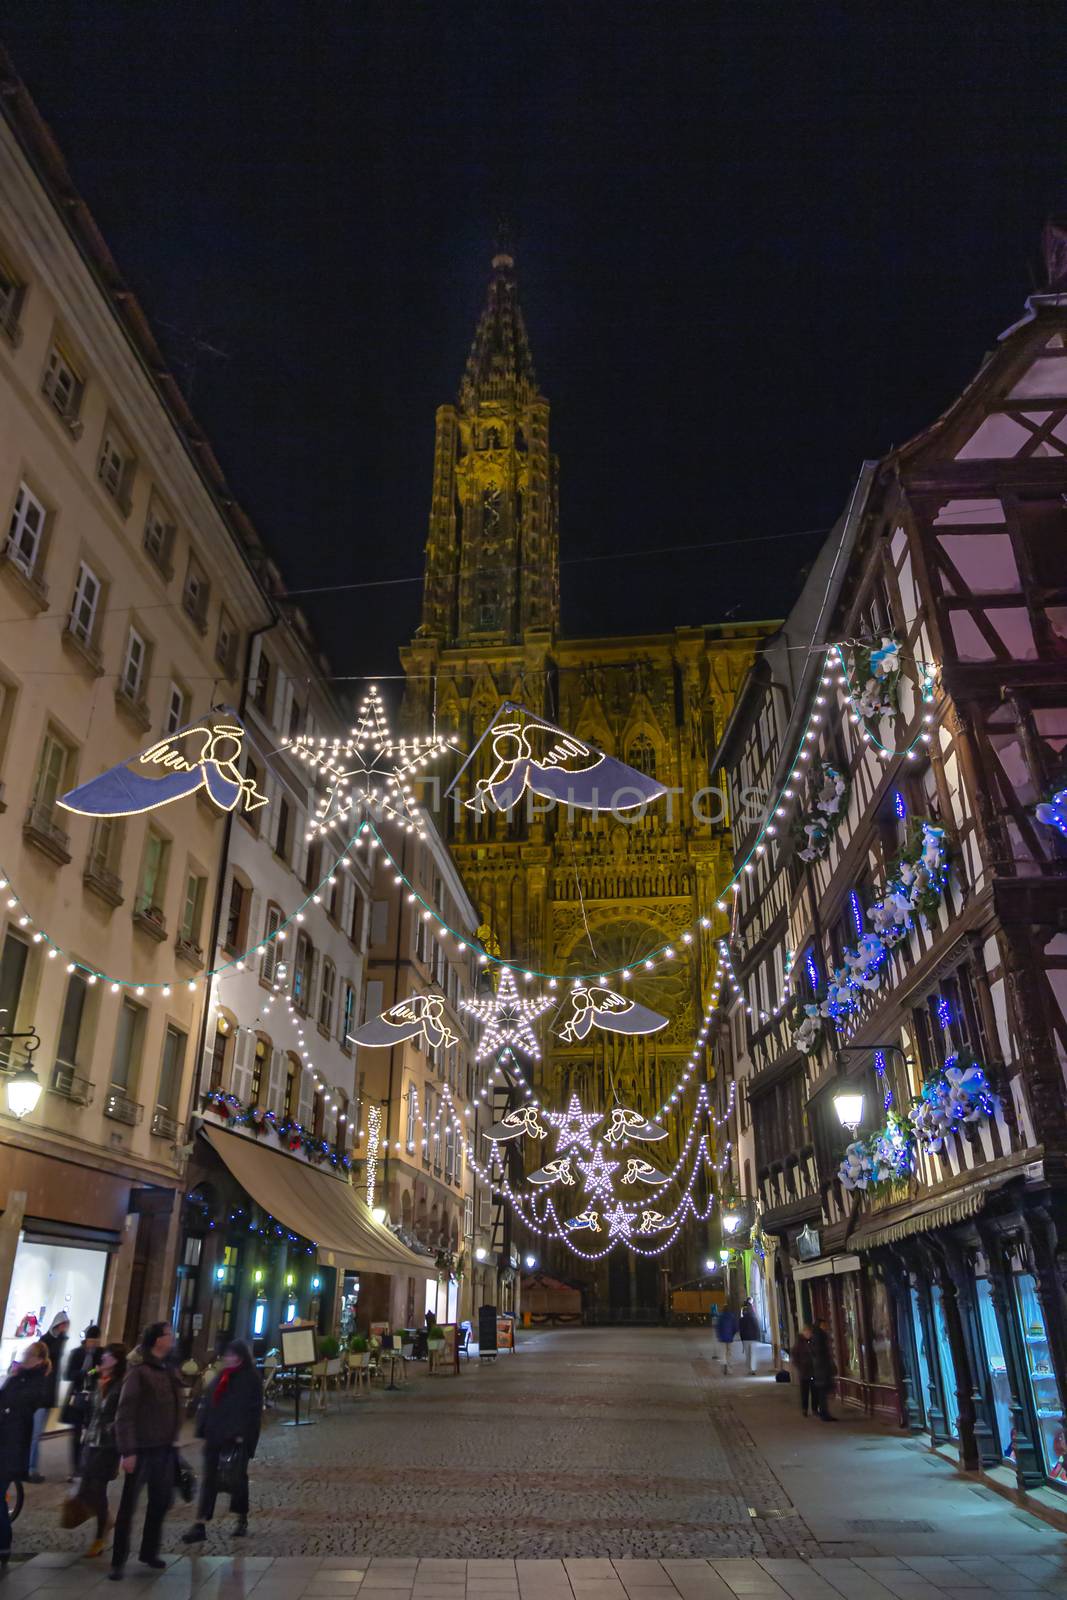 Late night shopping time in front Strasbourg cathedral during the festive and happening Christmas season by ankorlight